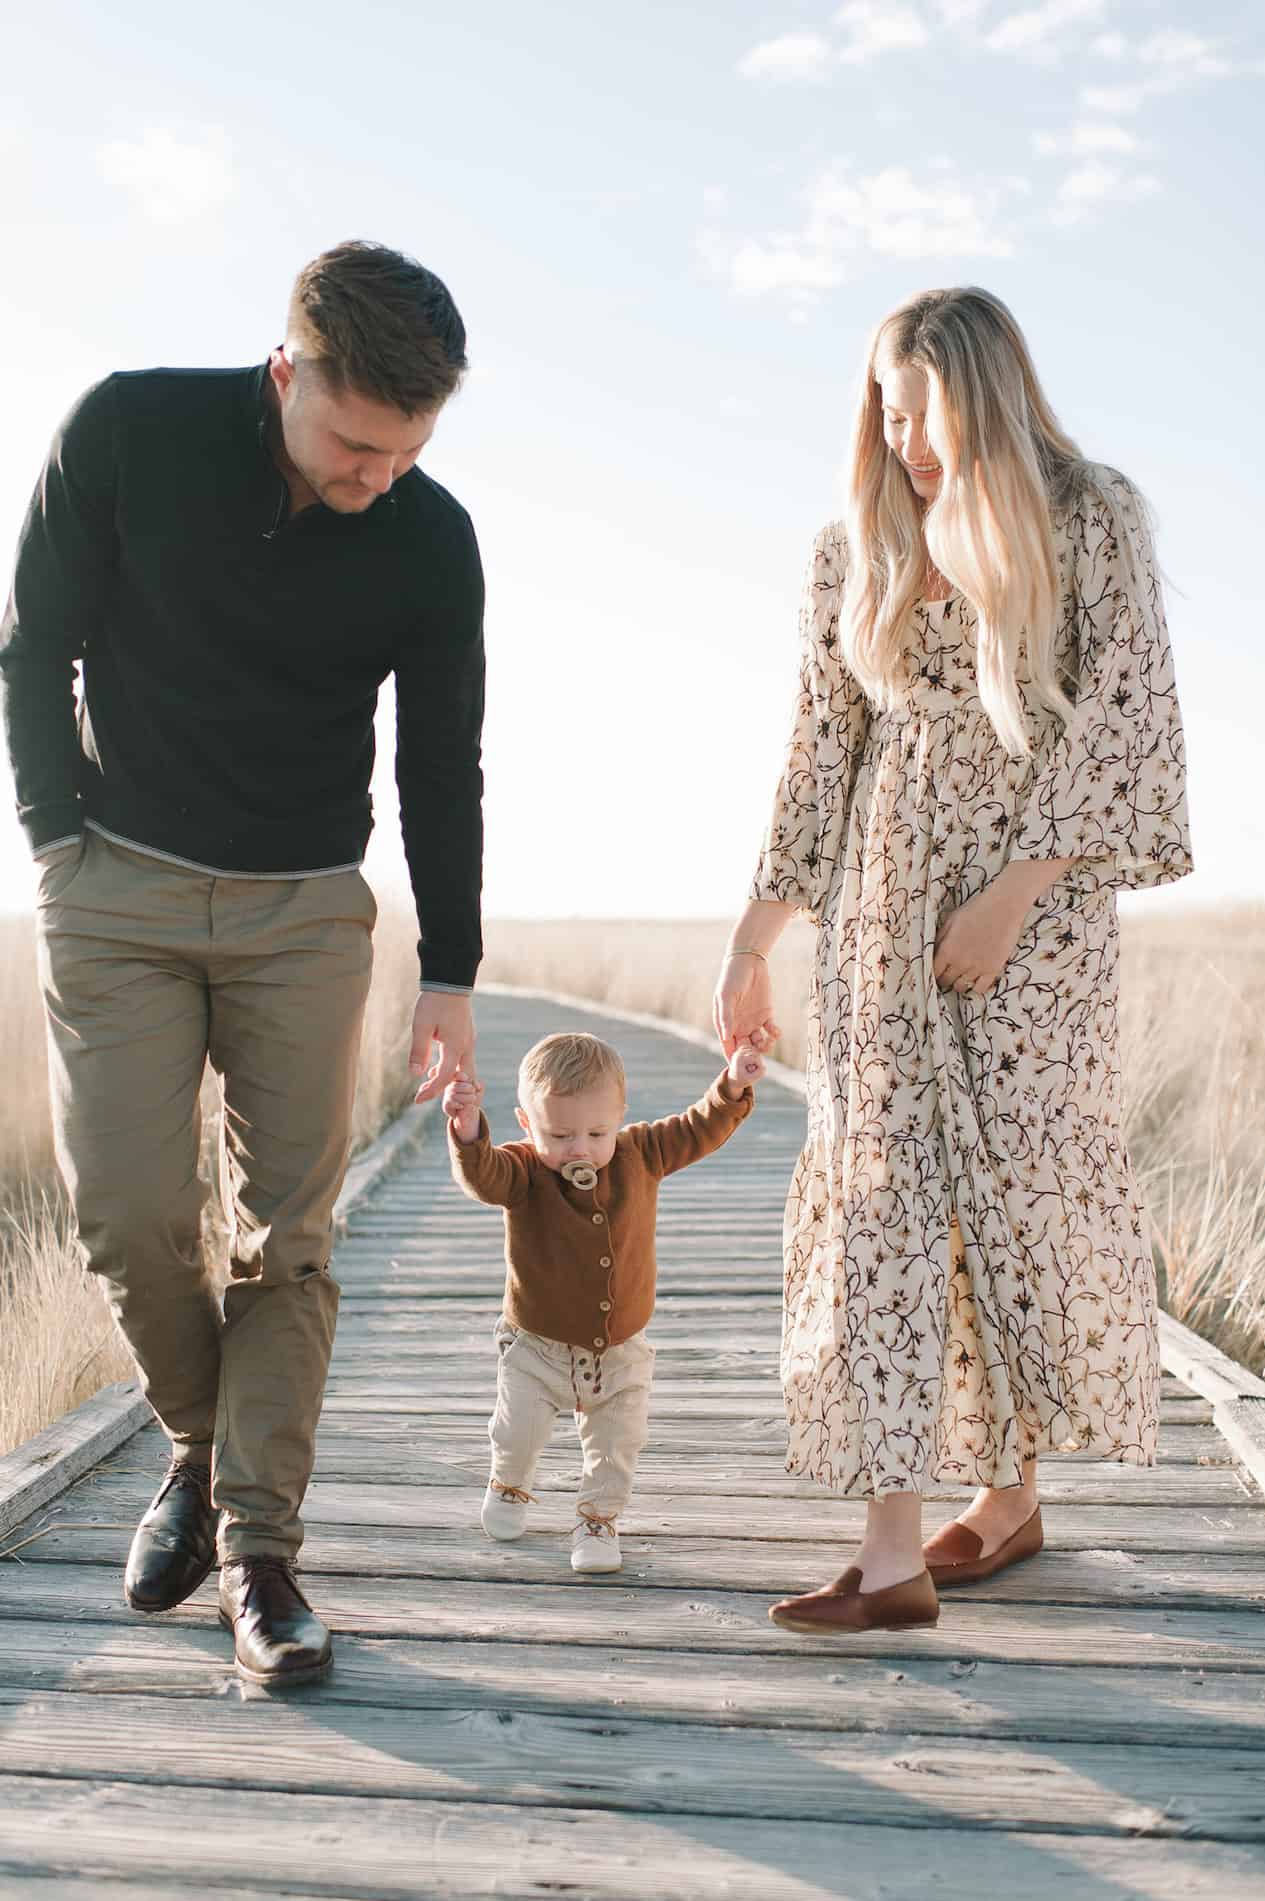 image of a family of three walking down a coastal boardwalk, the mom in a floral maxi dress, the dad in chino pants and a sweater, and the baby in a brown sweater and tan pants